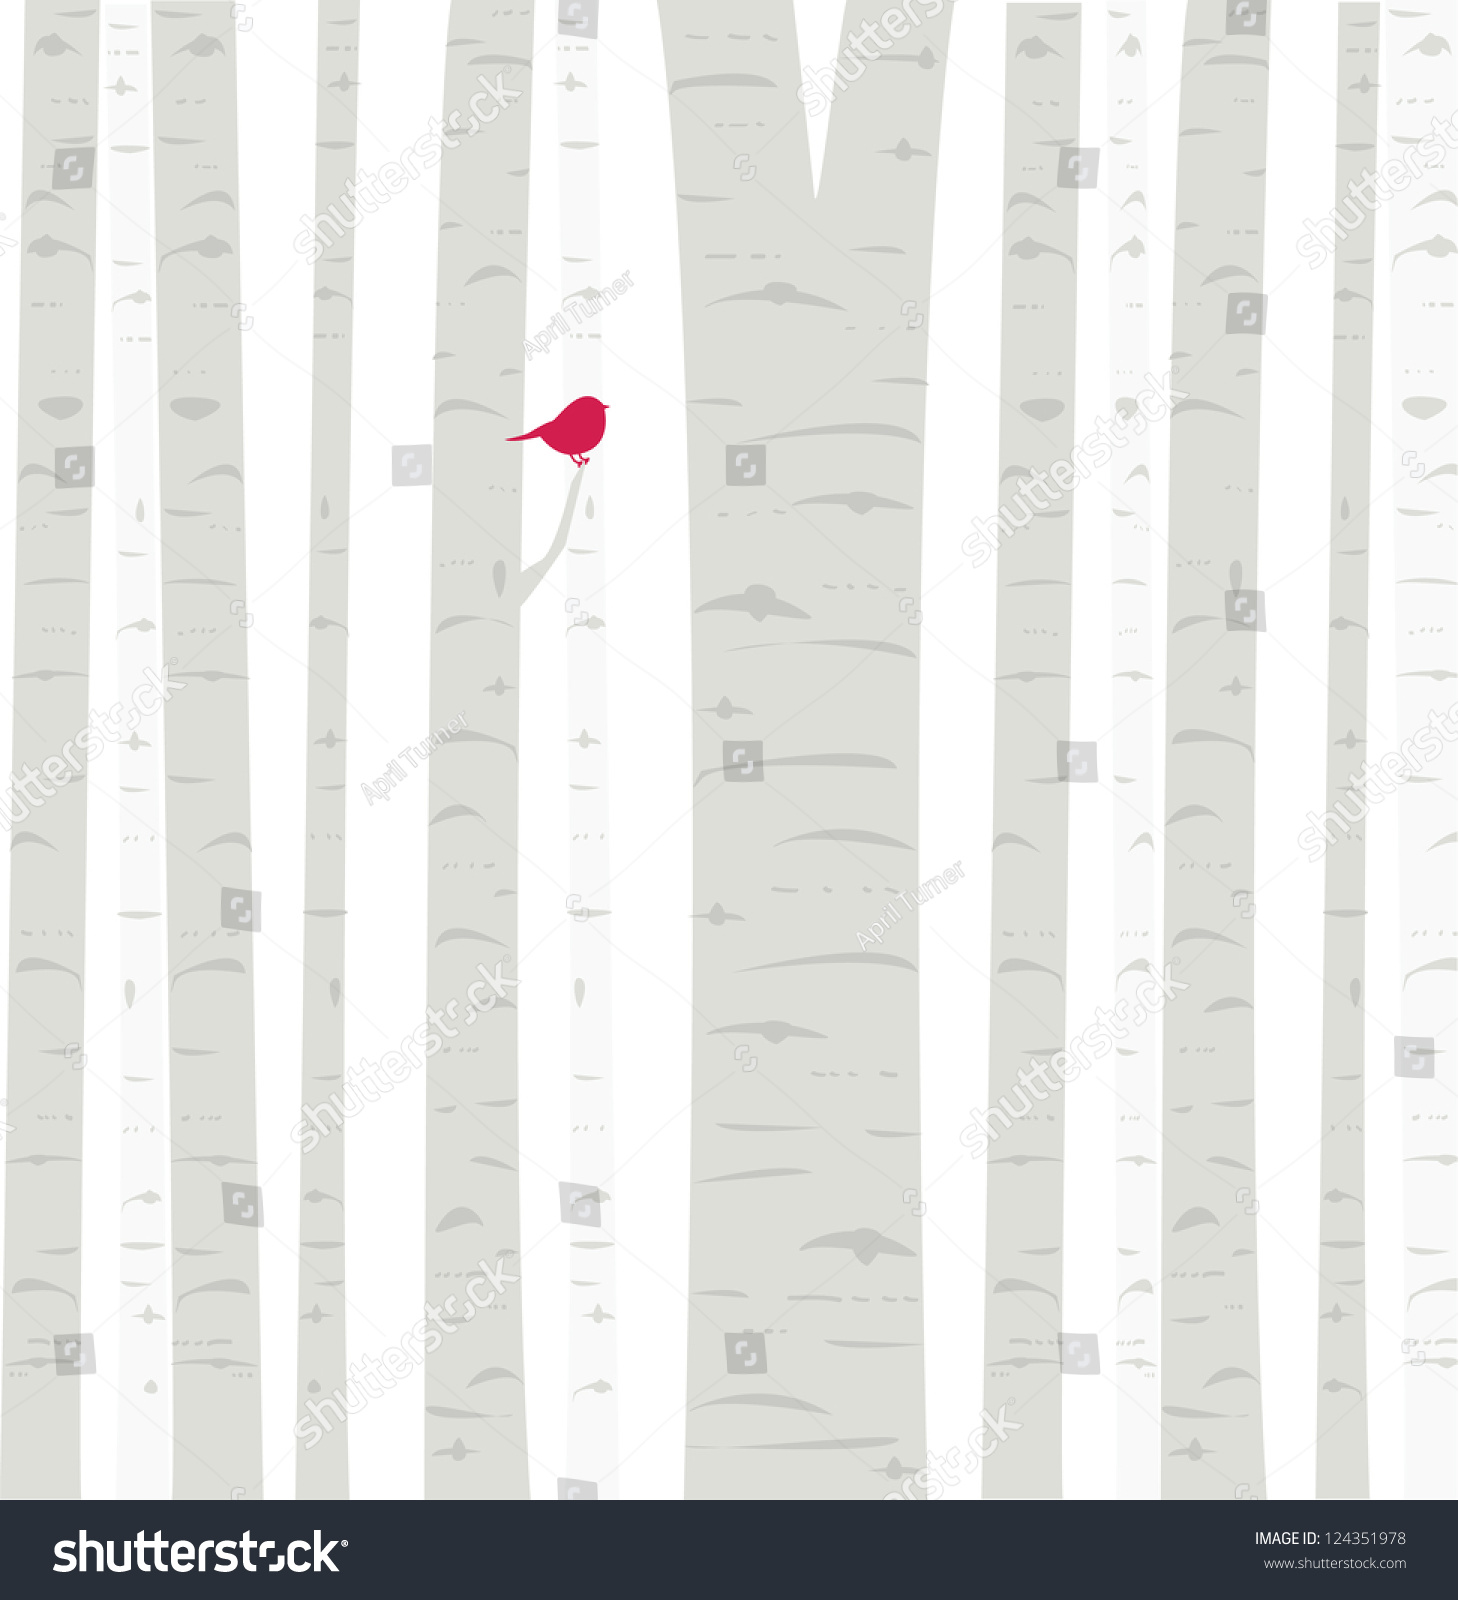 SVG of Aspen Birdie: a little red birdie perches among the trees in an Aspen grove. Fully editable vector illustration. svg